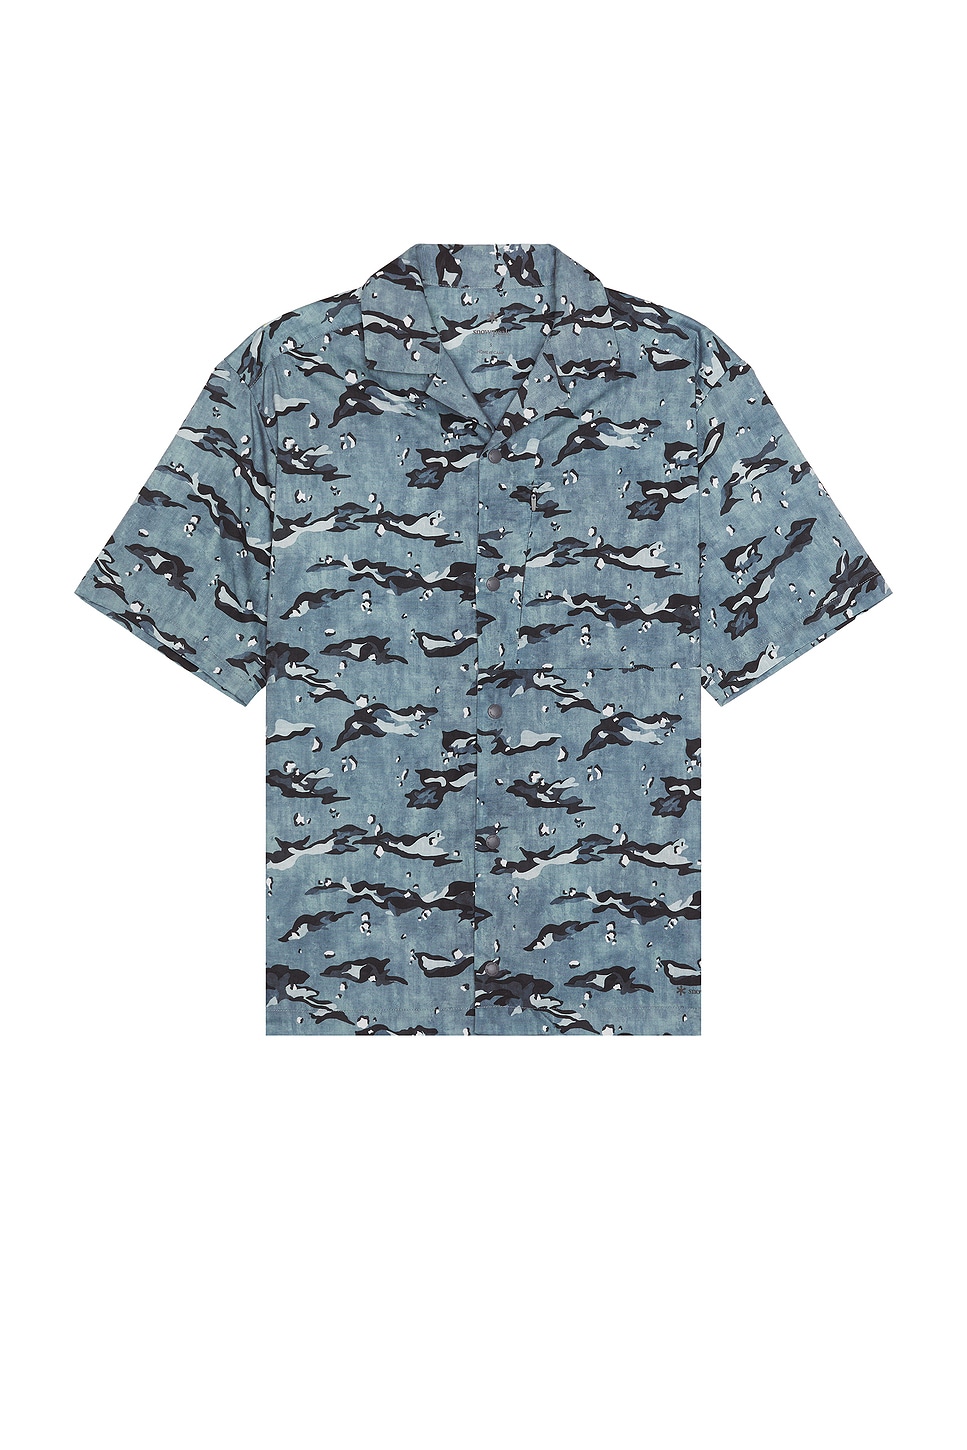 Printed Breathable Quick Dry Shirt in Grey